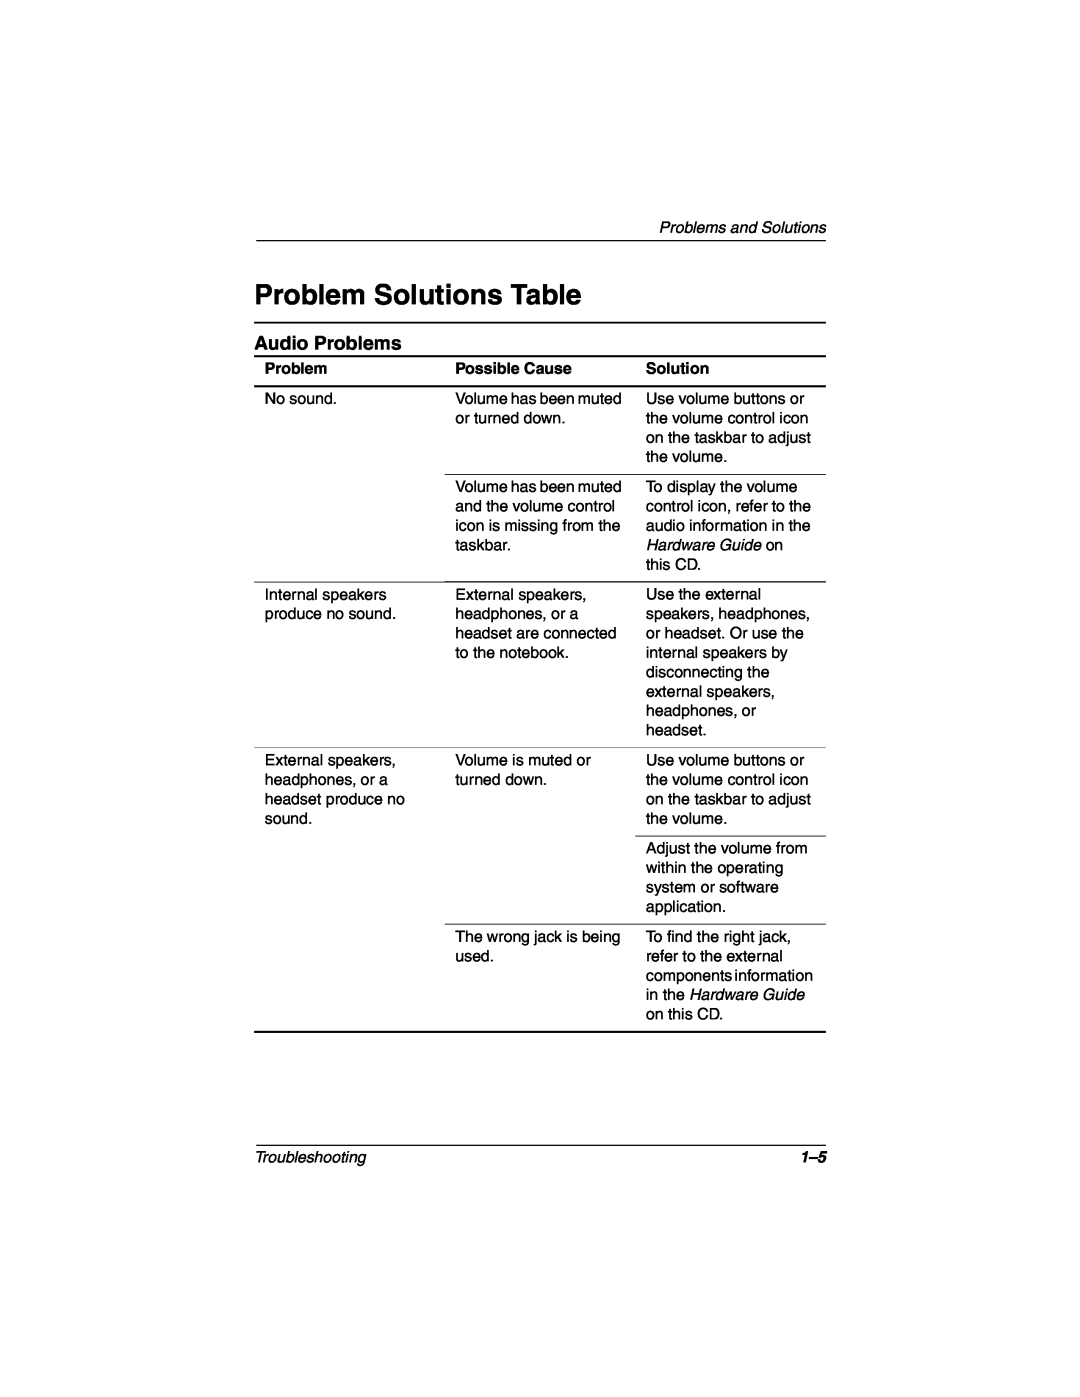 DeWalt 267644-001 manual Problem Solutions Table, Audio Problems, Possible Cause, Troubleshooting 